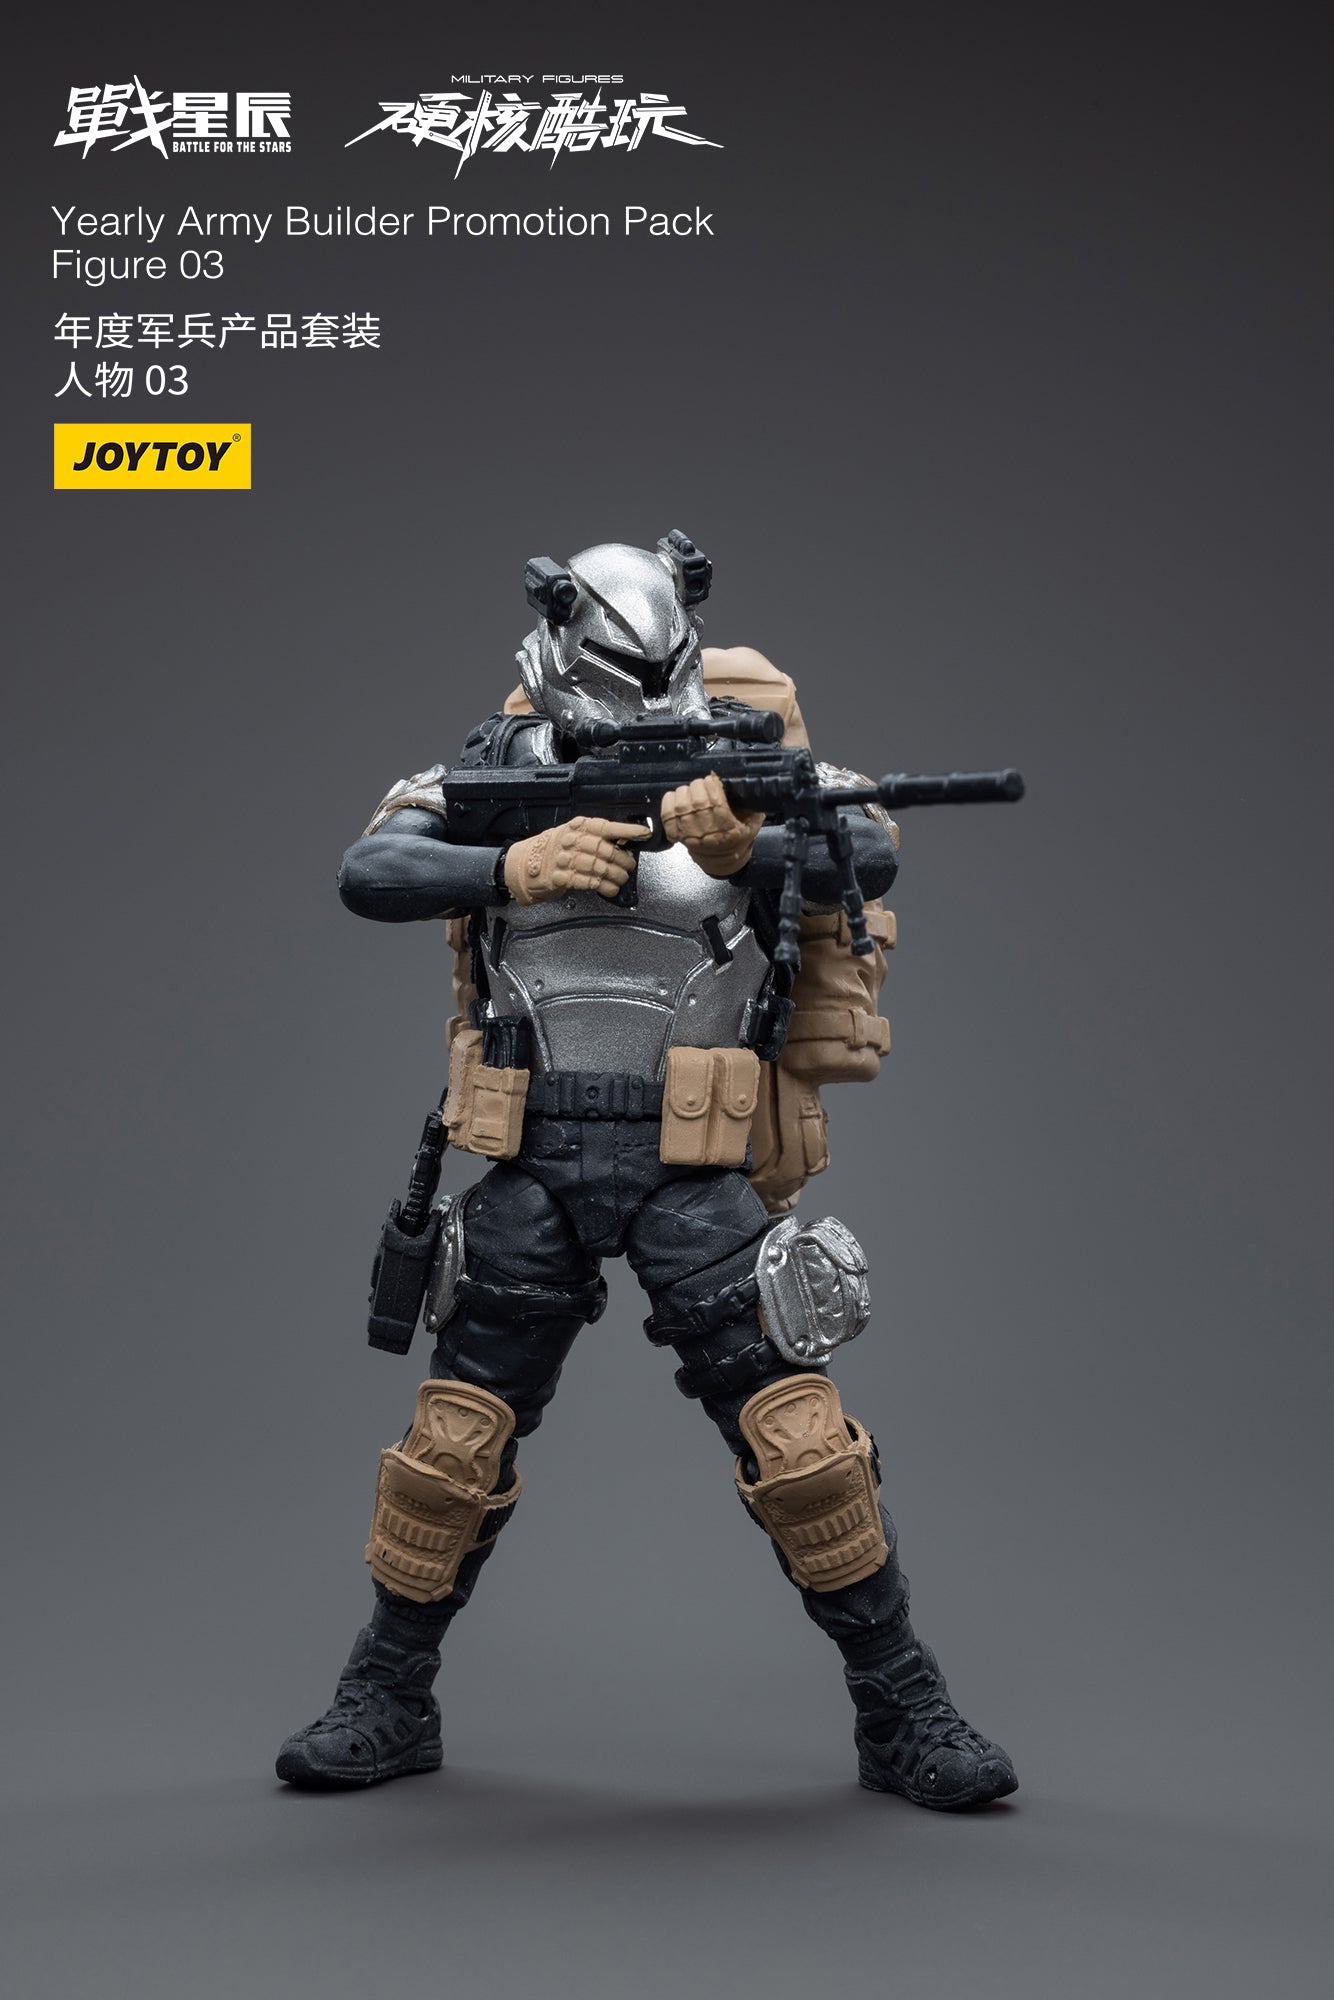 Joy Toy's Battle for the Stars figure series continues with the  Yearly Army Builder Promotion Pack! Each JoyToy 1/18 scale articulated figure features intricate details on a small scale and come with equally-sized accessories.